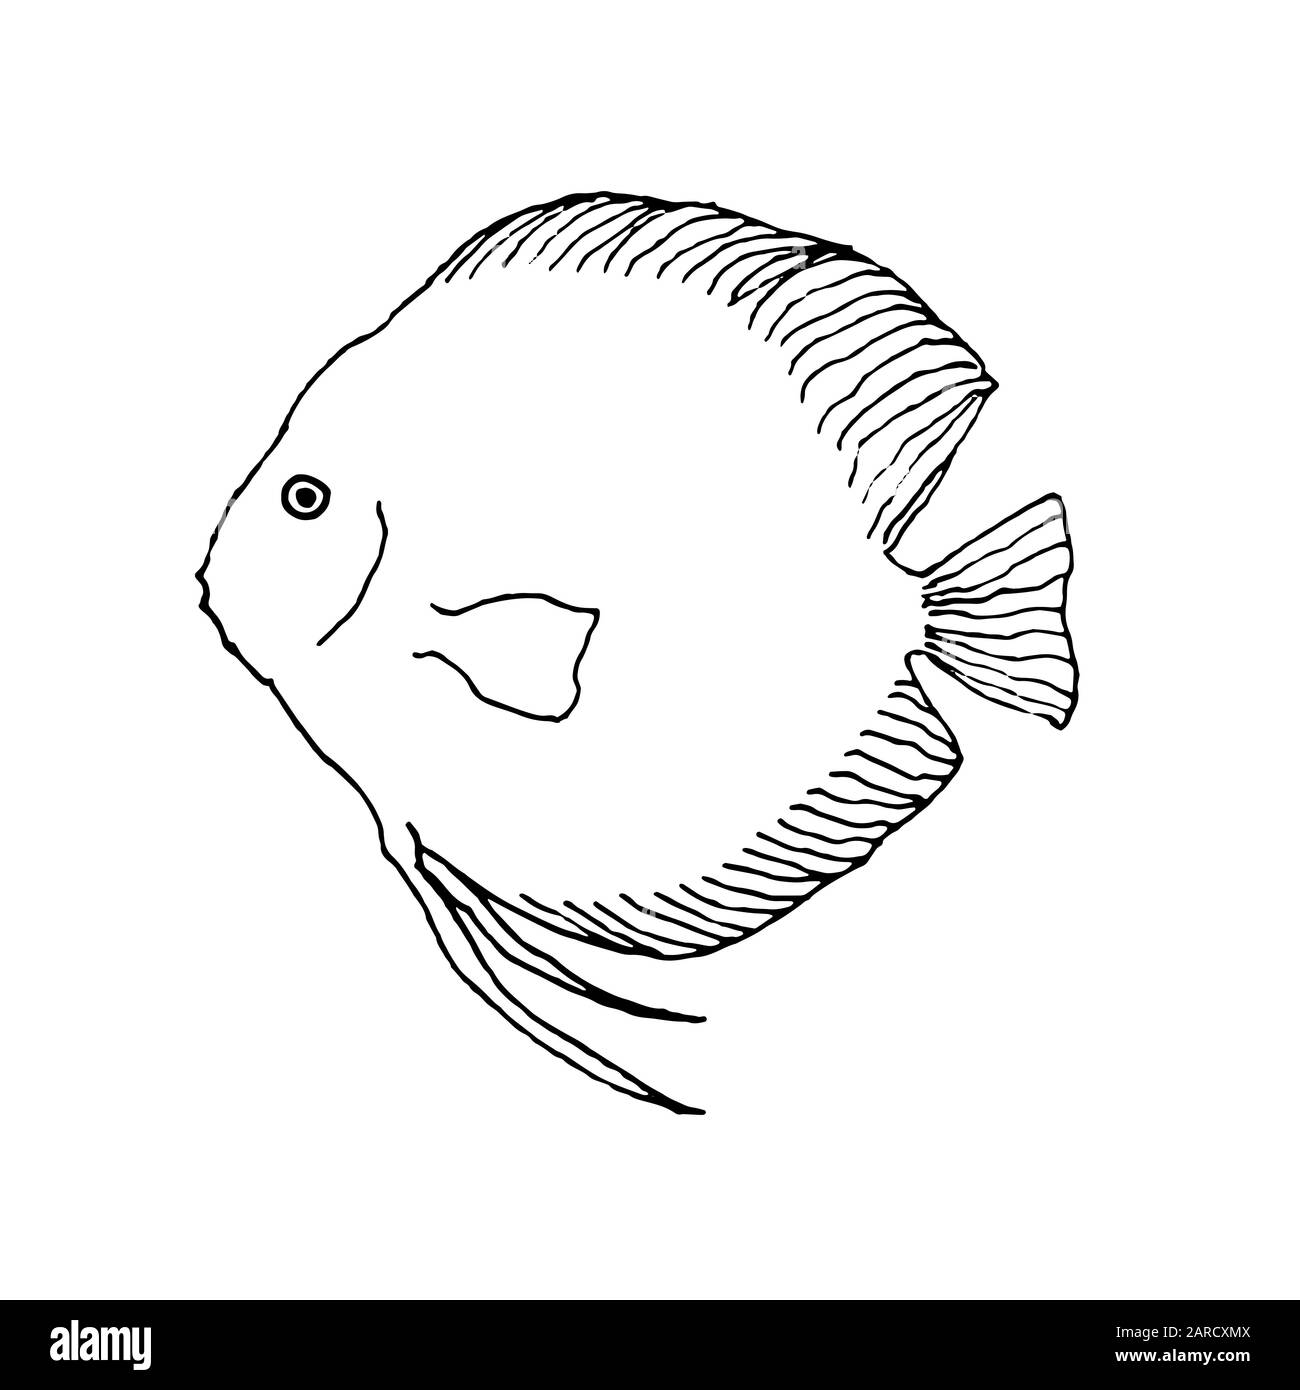 Discus fish. Hand drawing sketch. Black outline on white background. Vector illustration can be used in greeting cards, posters, flyers, banners, logo, further design etc. EPS10 Stock Vector